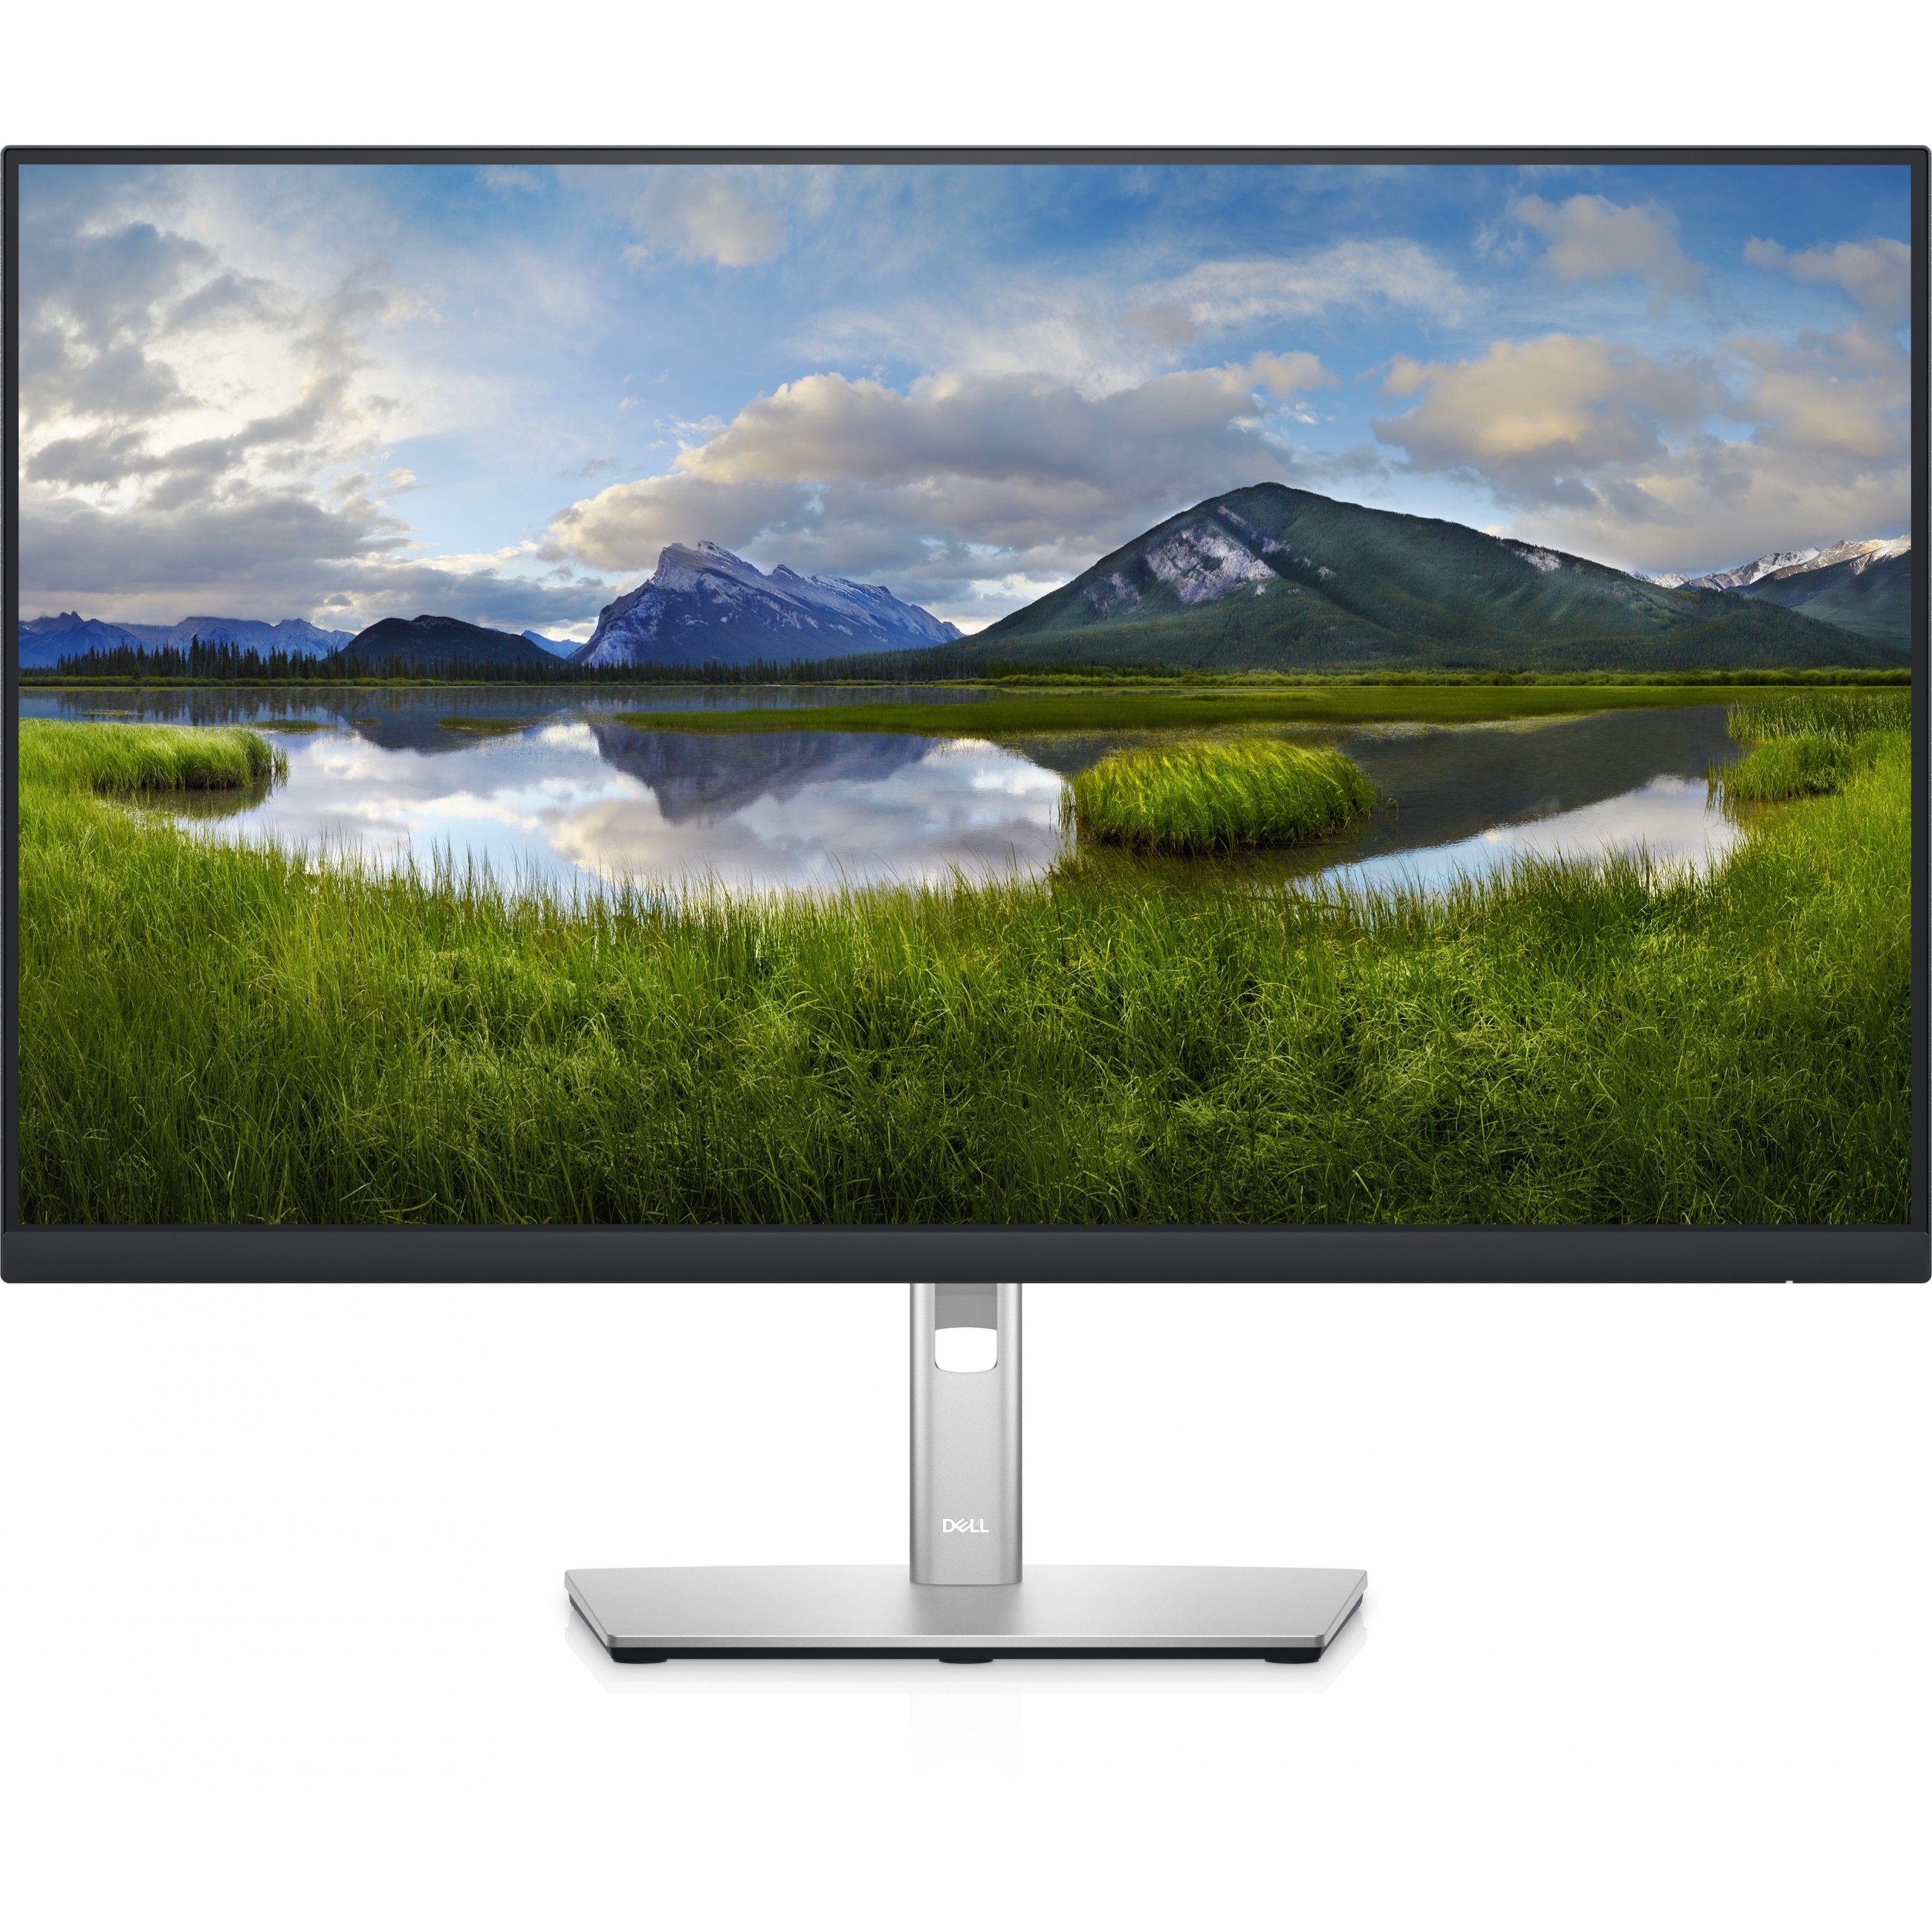 DELL P Series P2722HE LED display - DELL-P2722HE